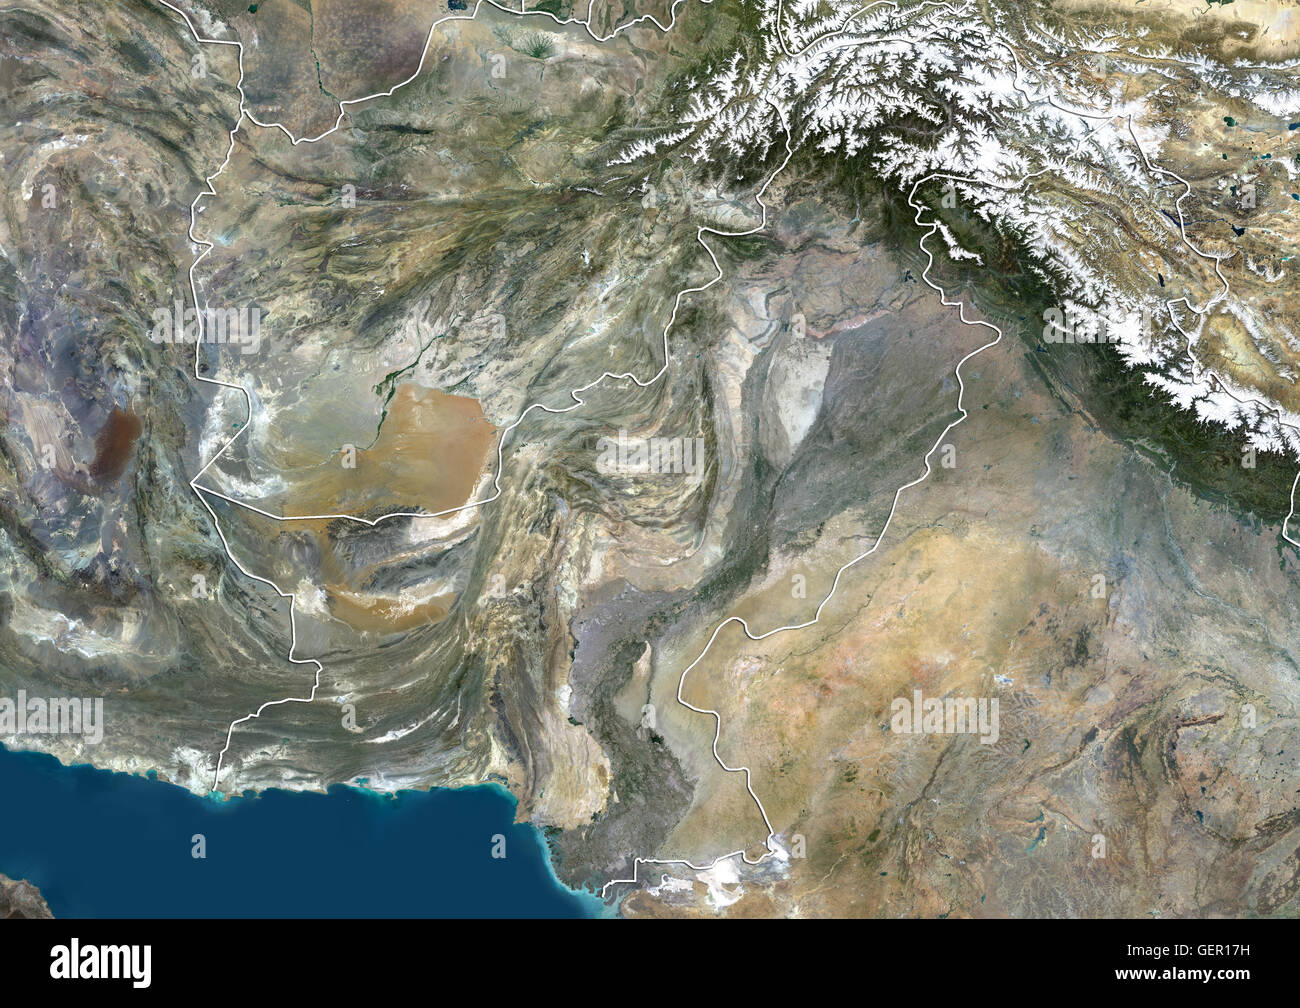 Satellite view of Pakistan (with country boundaries). This image was compiled from data acquired by Landsat 8 satellite in 2014. Stock Photo